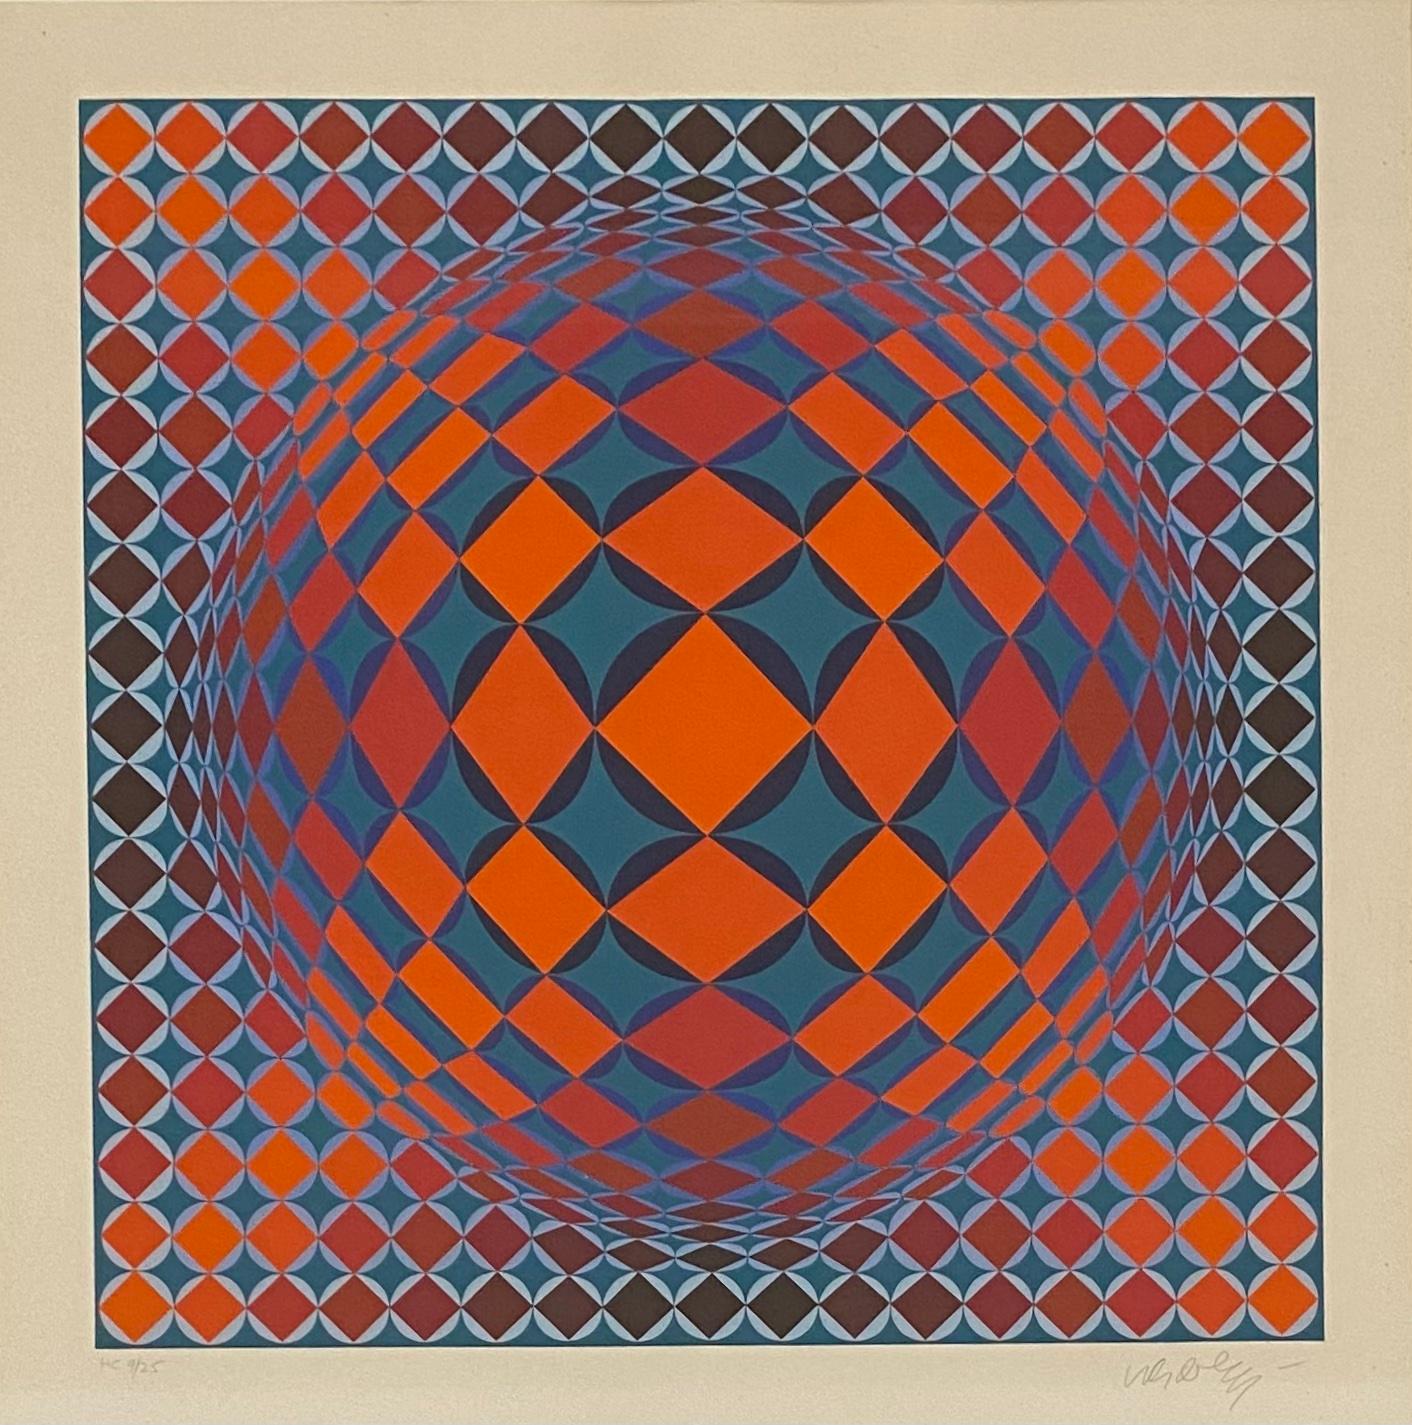 Artist: Victor Vasarely

Medium: Lithograph
Movement/Style: Modern
Signed and Numbered : 9/25

This Victor Vasarely lithograph is in very good vintage condition. The art is vibrant and without damage. It looks to have its original mat and framing